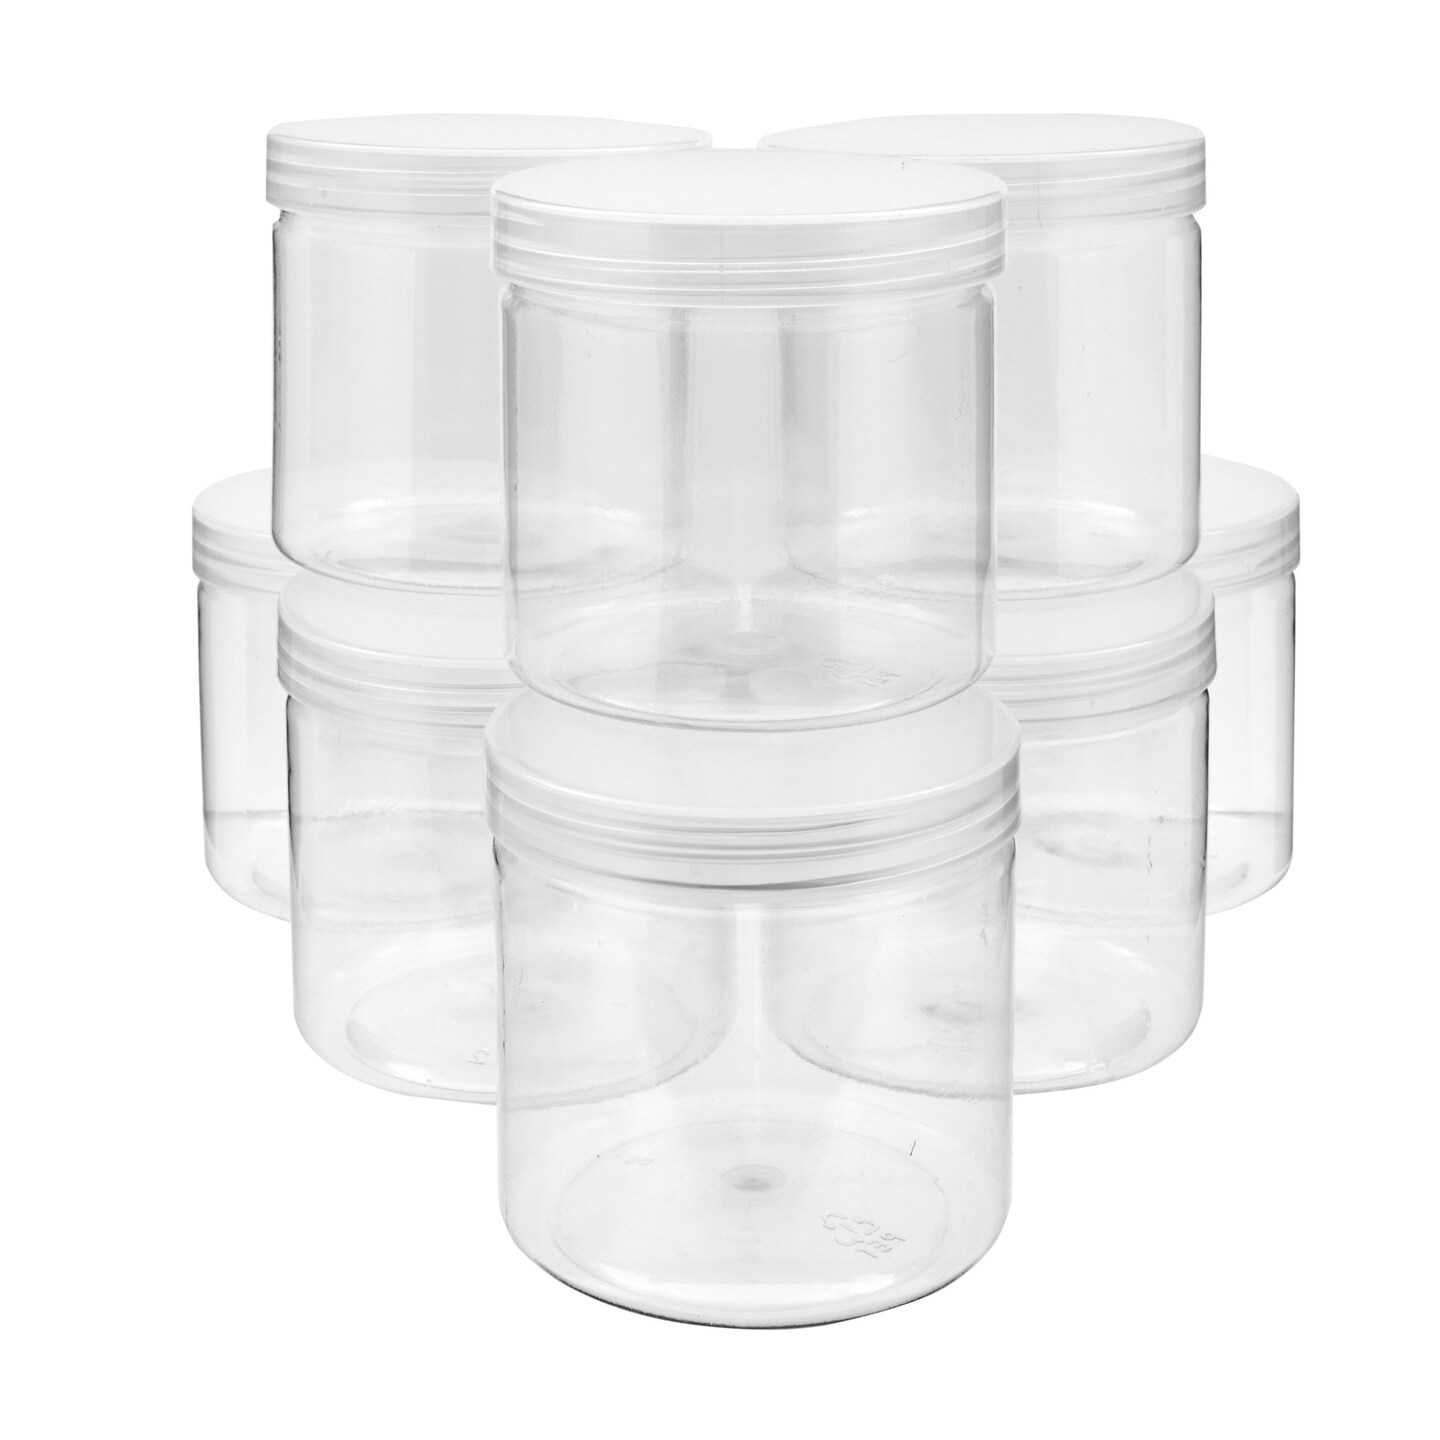 Clear Plastic Jars with Screw Lid